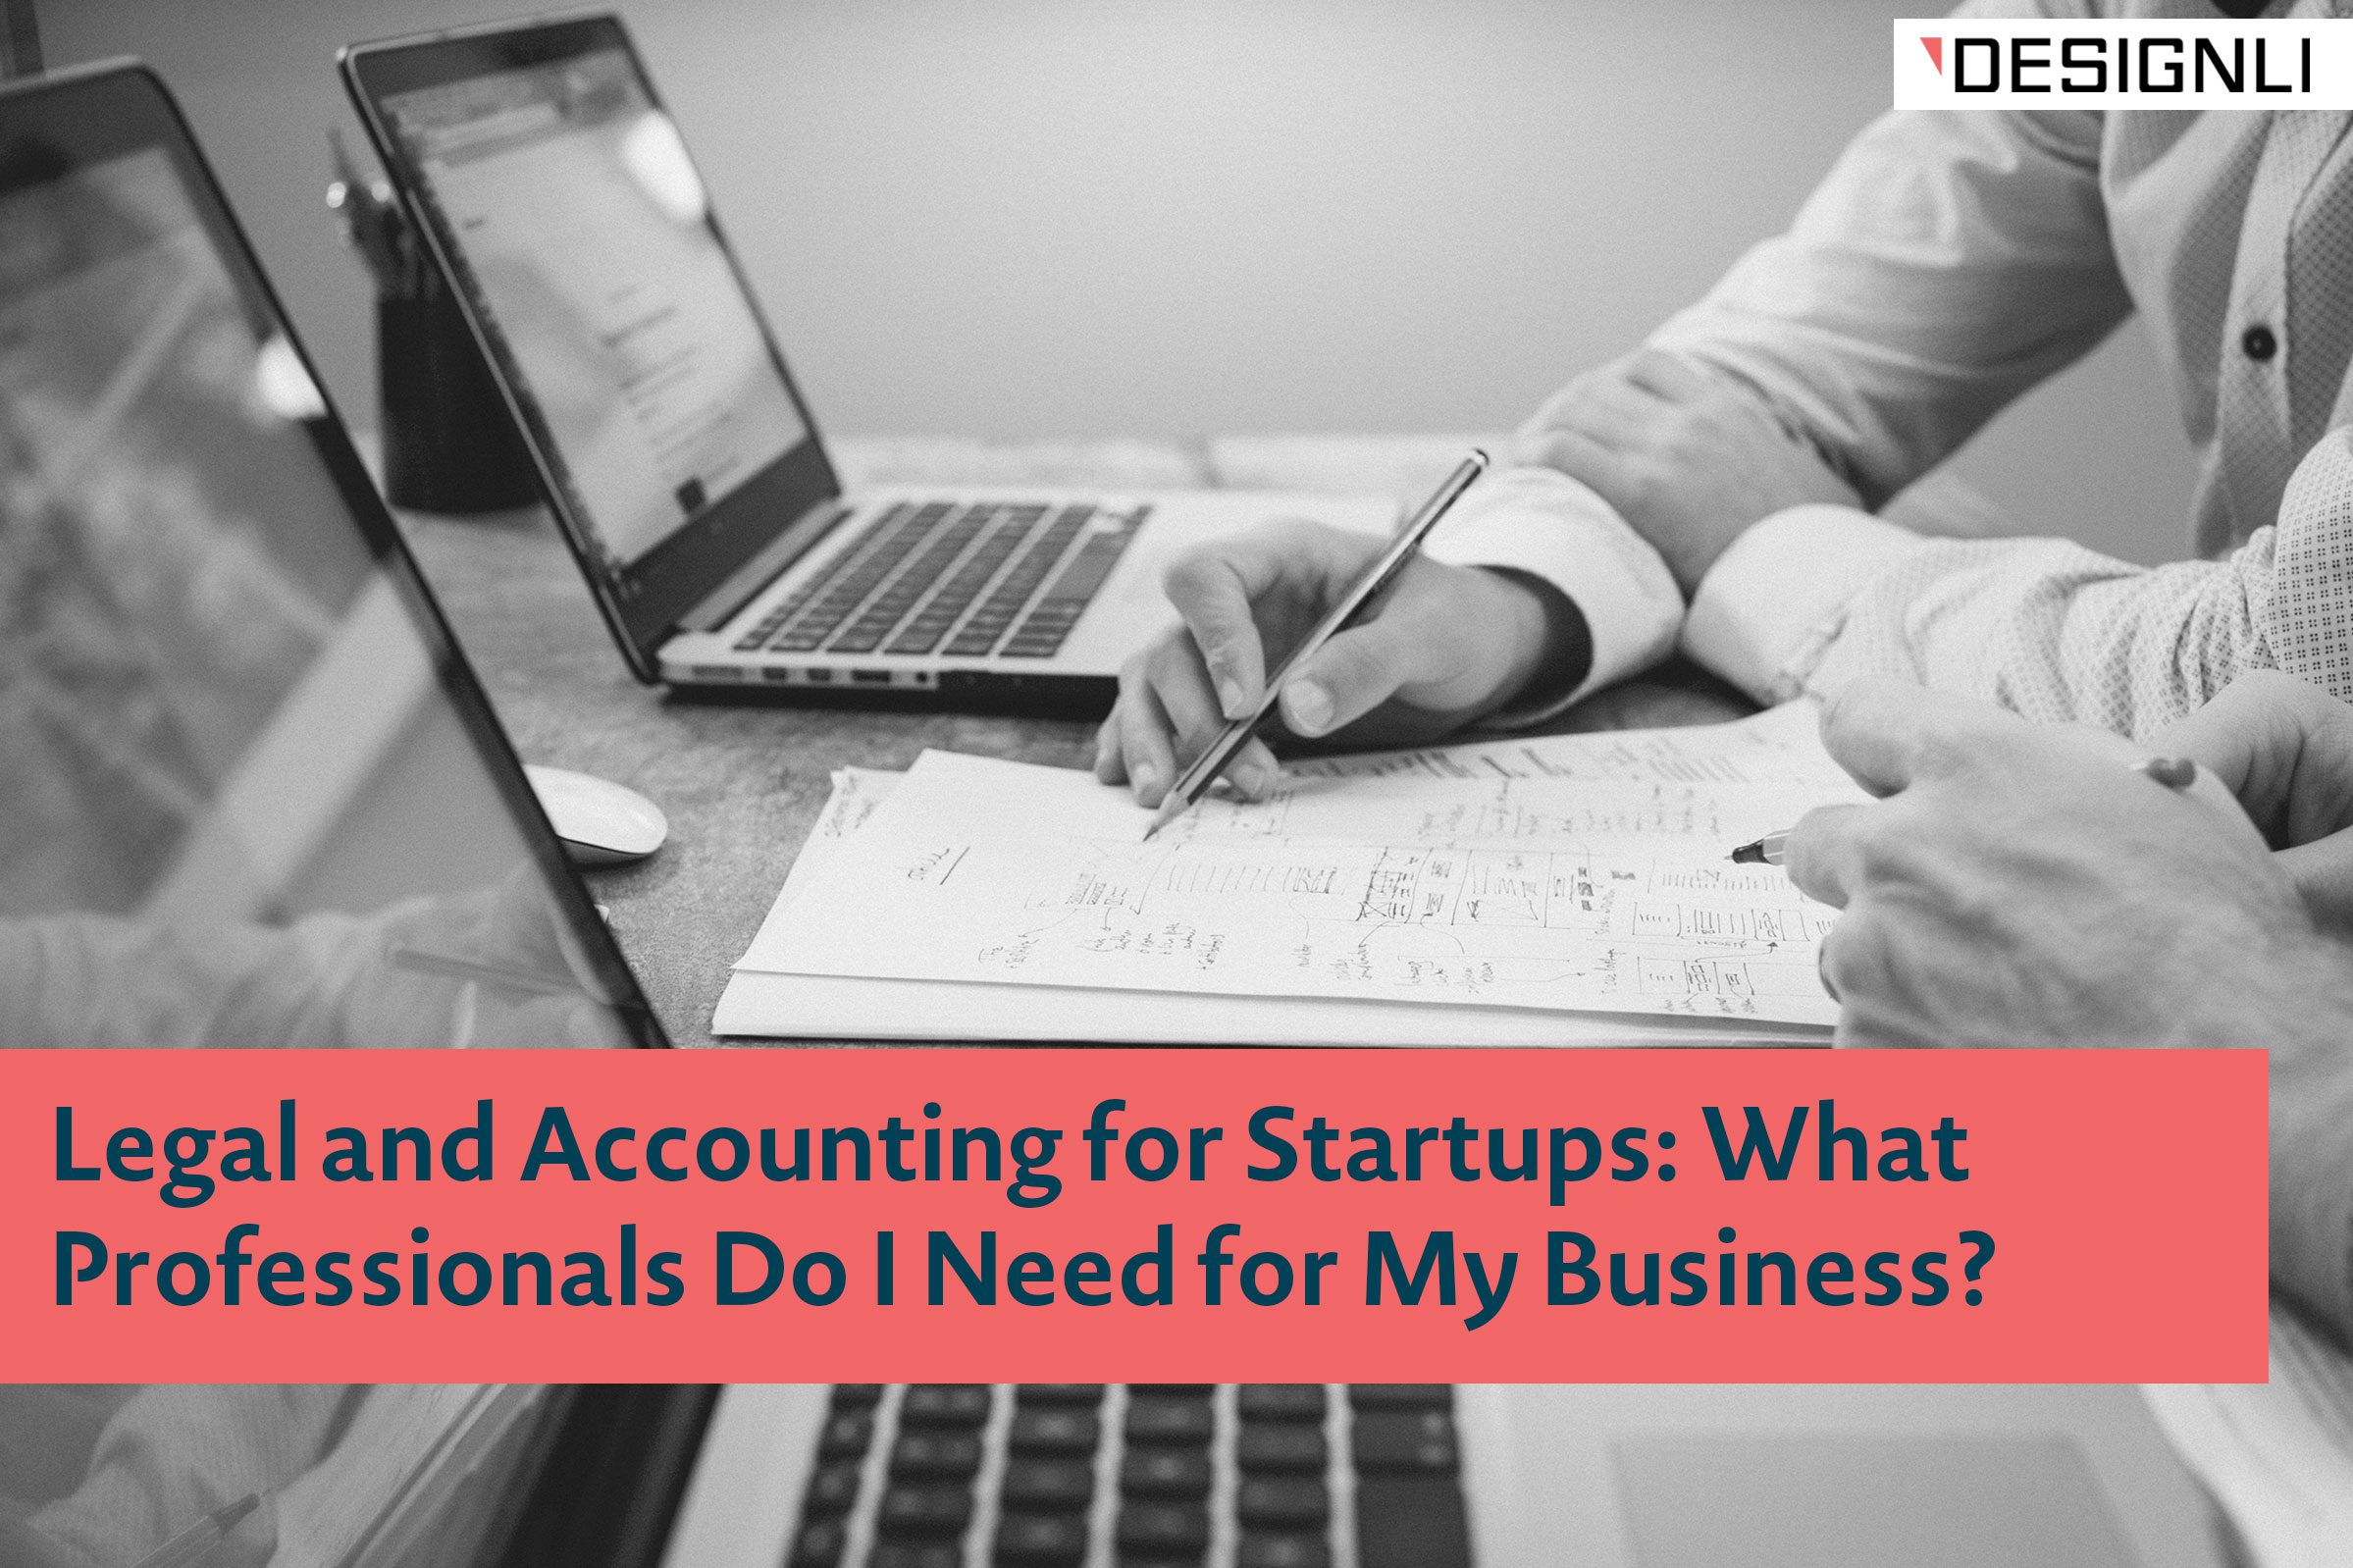 Legal and Accounting for Startups: What Professionals Do I Need to Launch my Business?